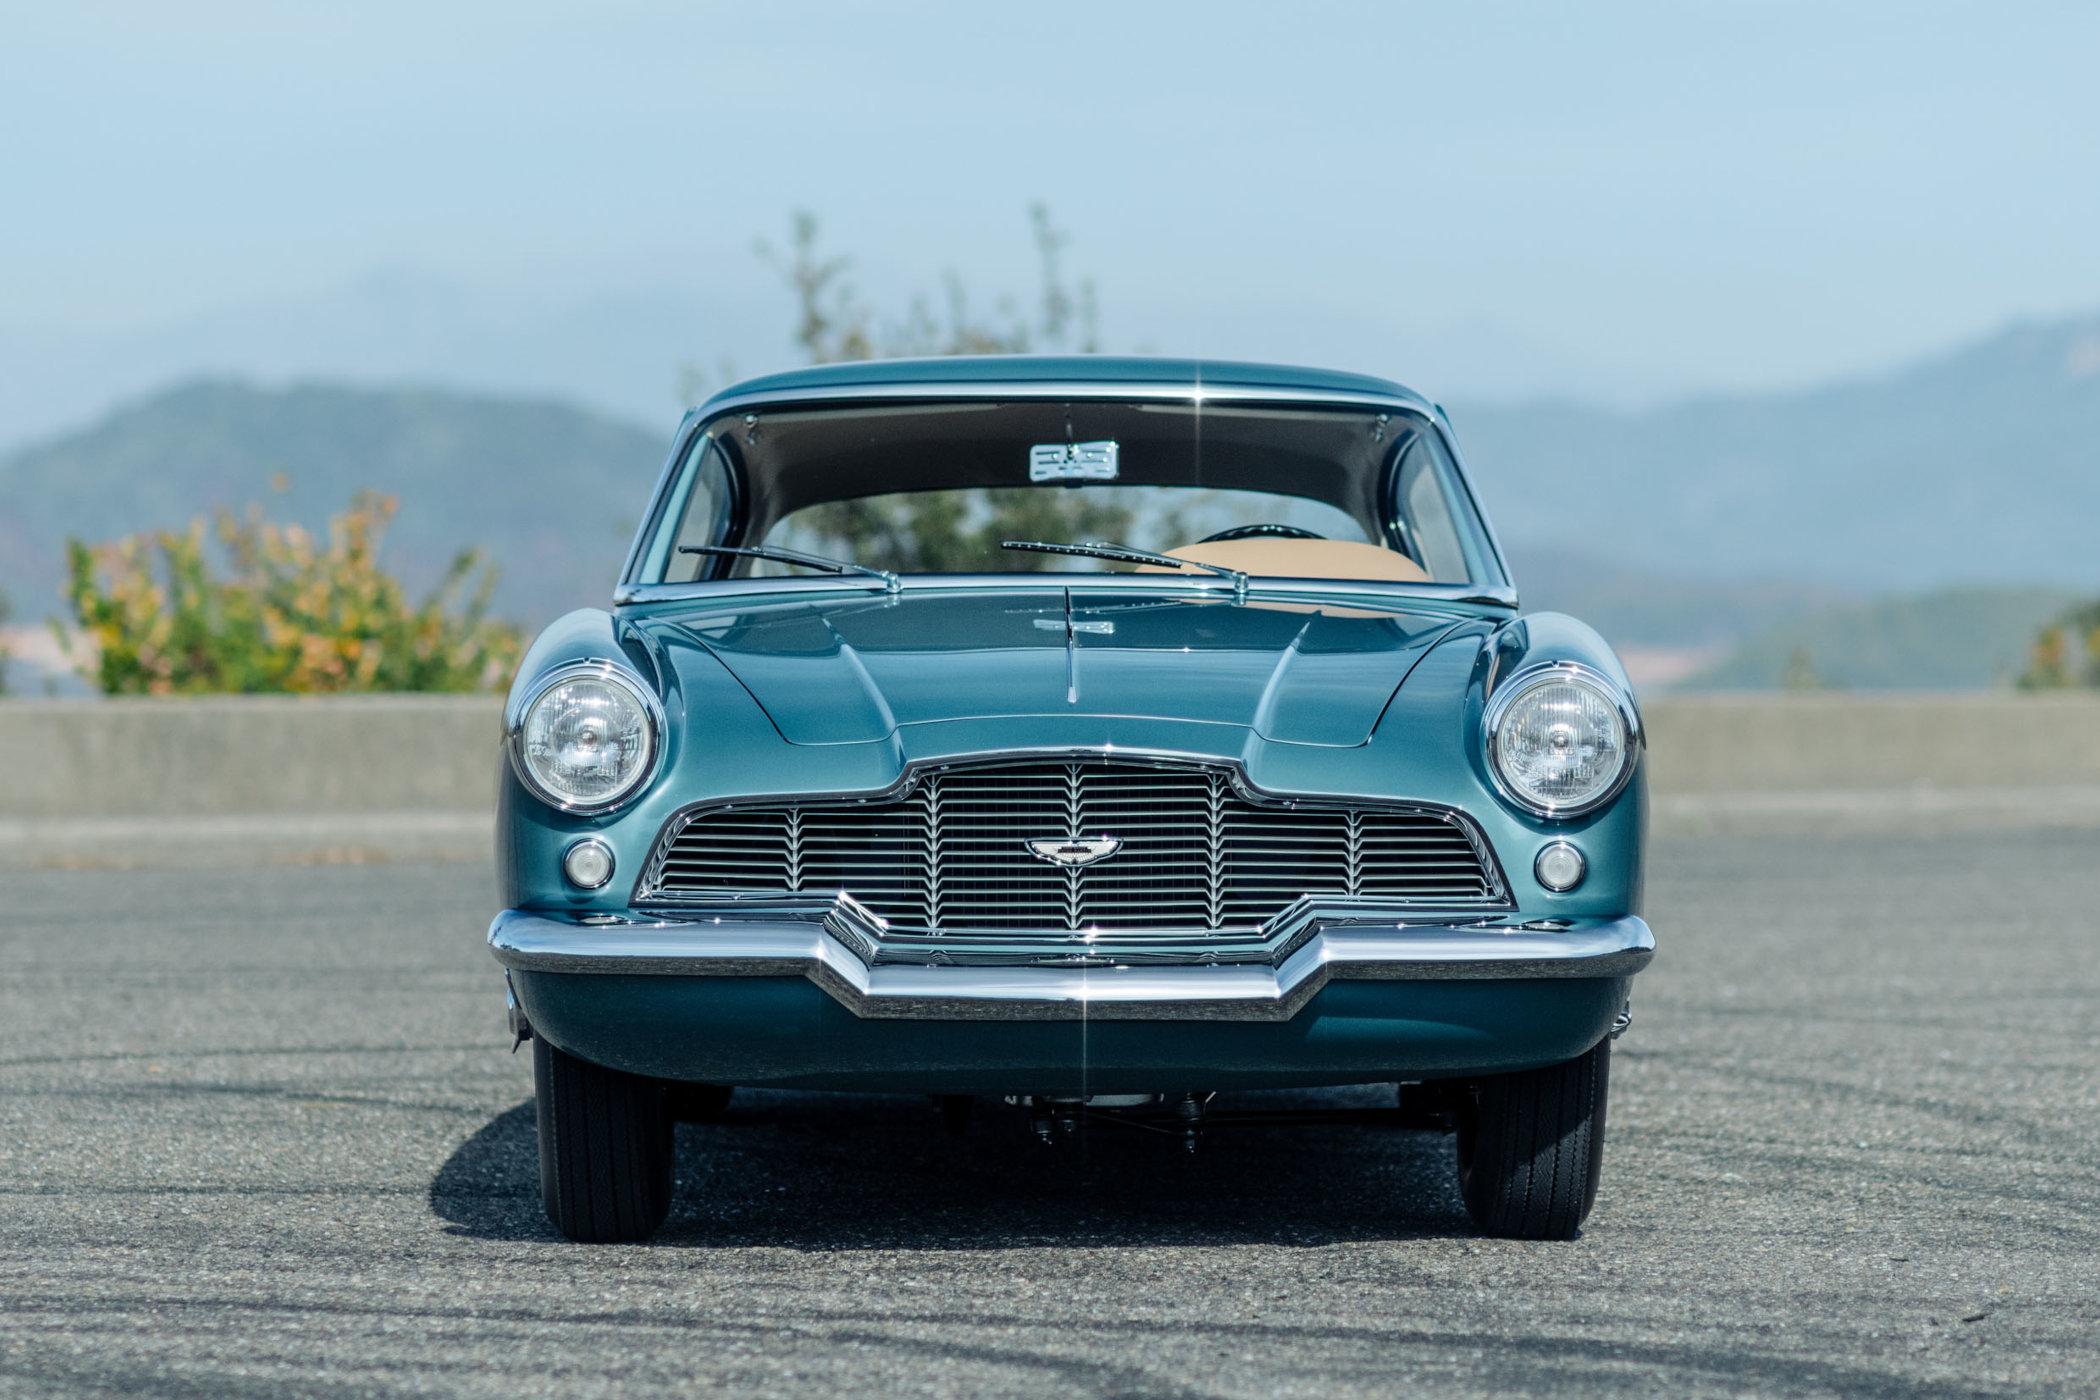 1954 Aston Martin DB 2-4 Coupe by Bertone - RM Sotheby's - 9